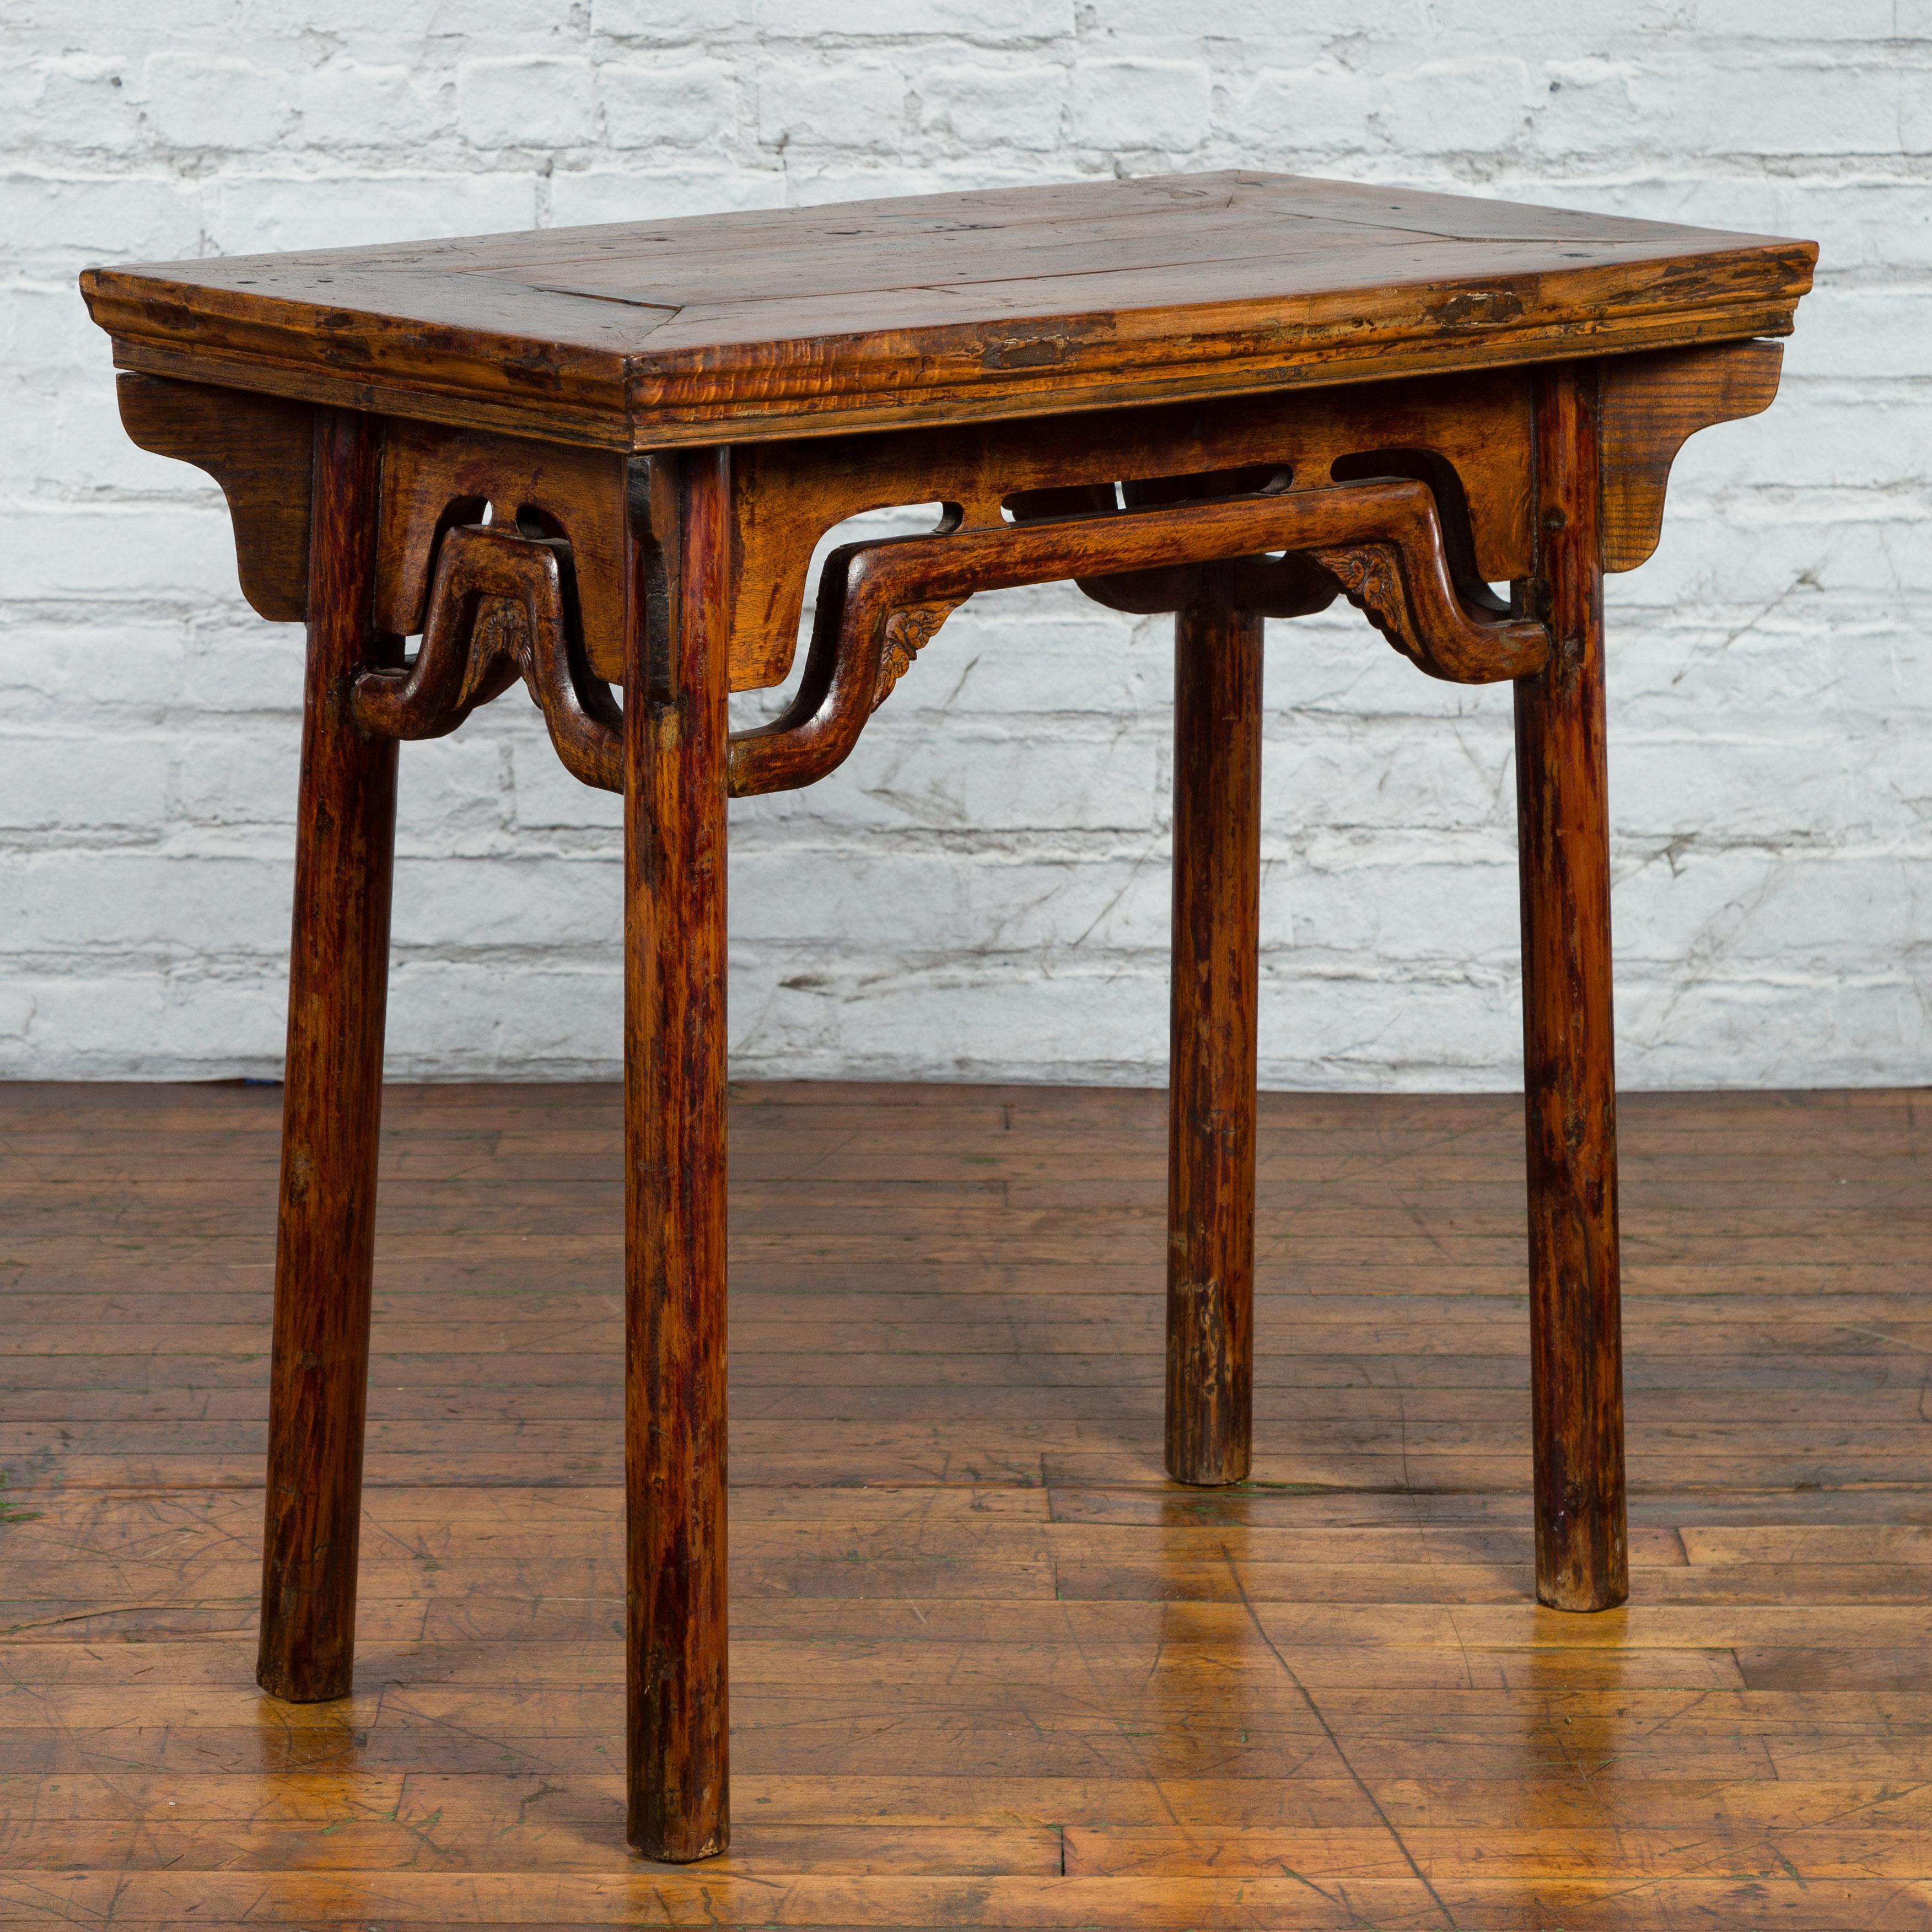 A Chinese Qing Dynasty Ming style elmwood wine table from the 19th century, with carved spandrels and humpback stretchers. Created in China during the Qing Dynasty, this elmwood wine table features a rectangular top with central board and nicely